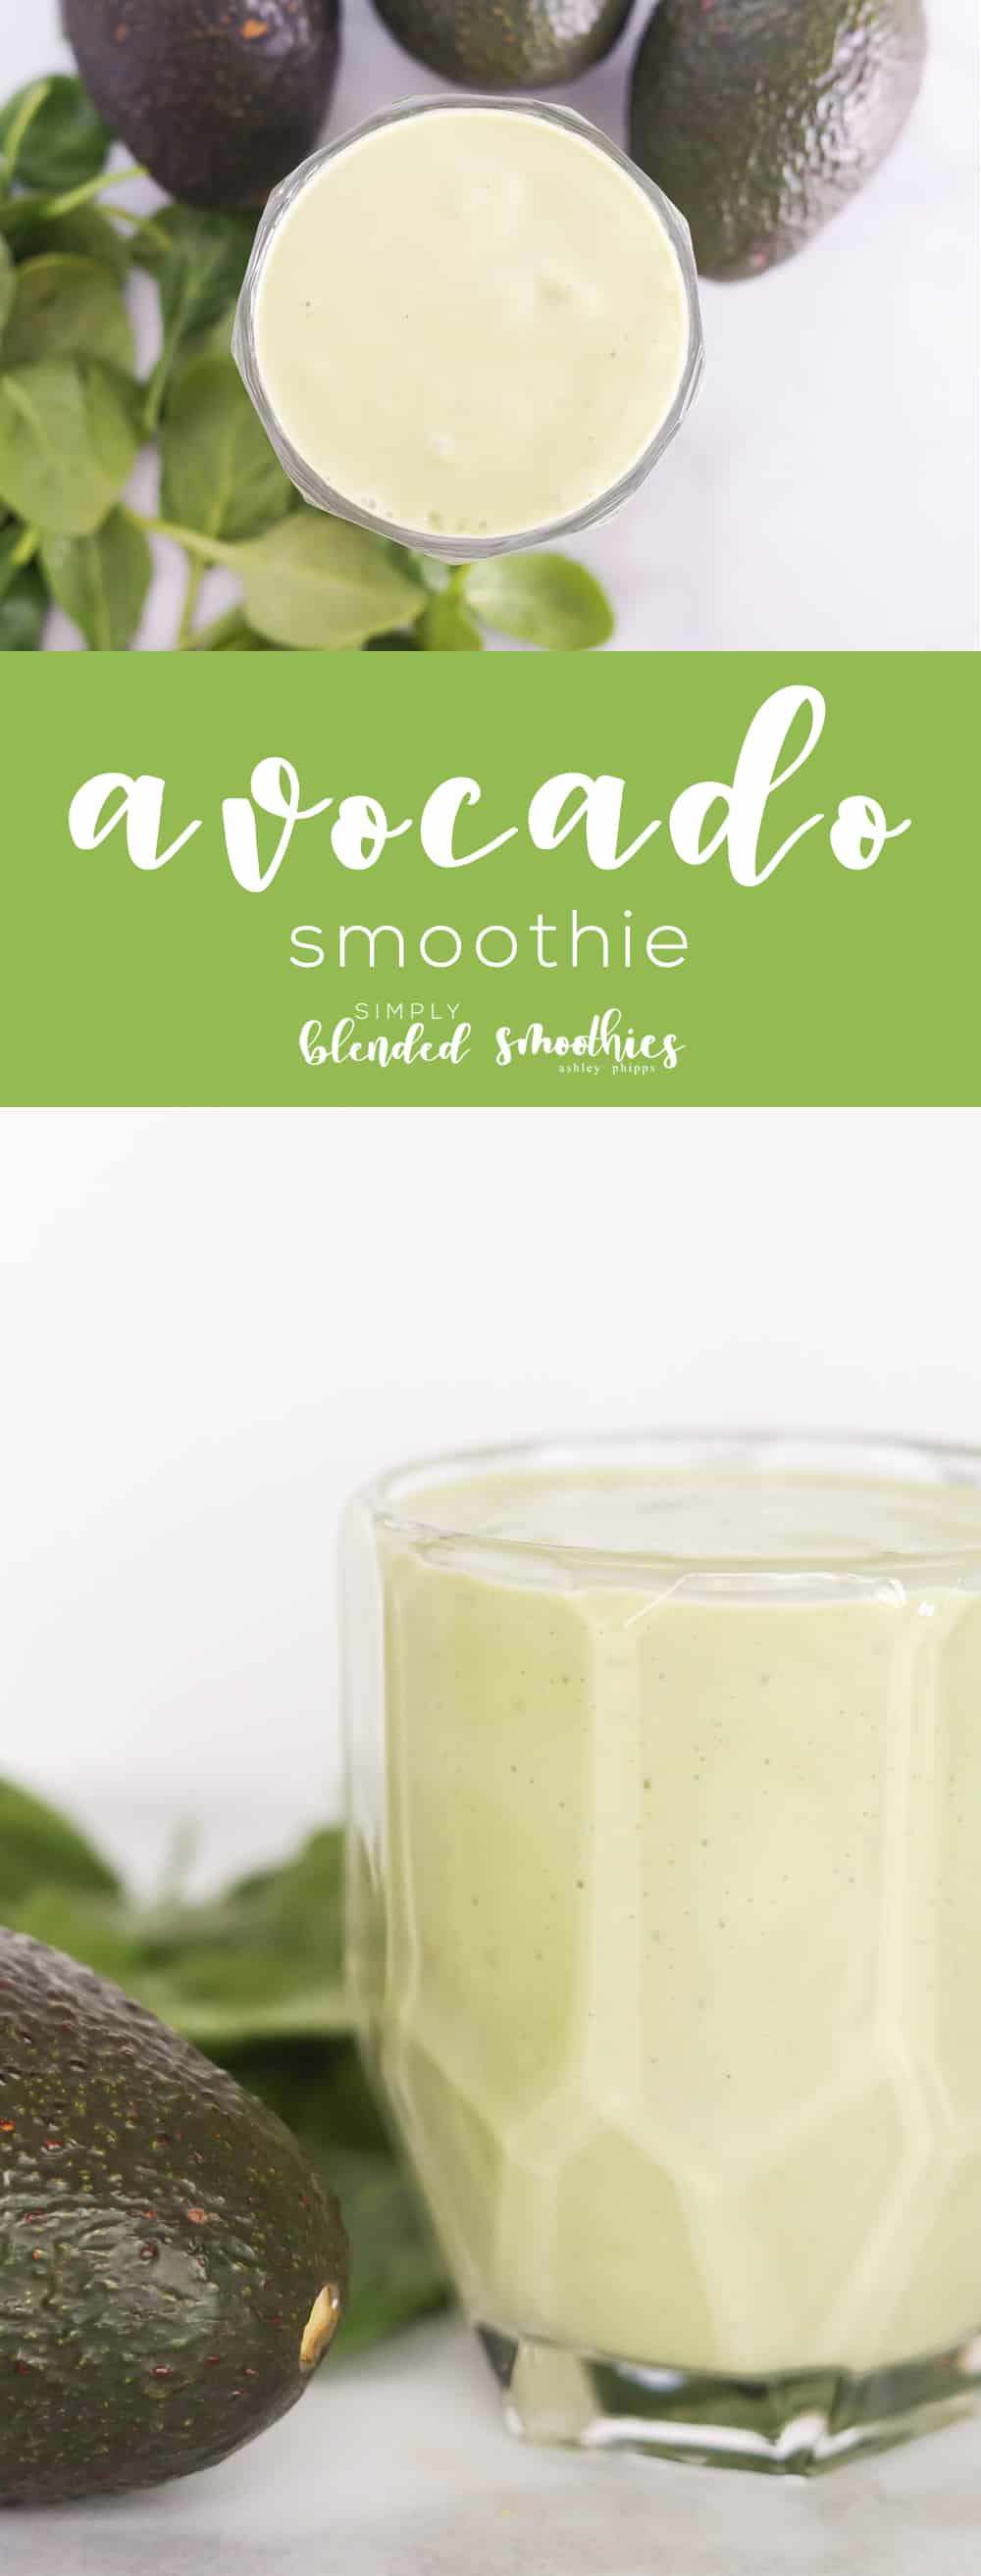 Avocado Smoothie - This Avocado Smoothie Recipe Is So Delicious And A Great Way To Start Your Day